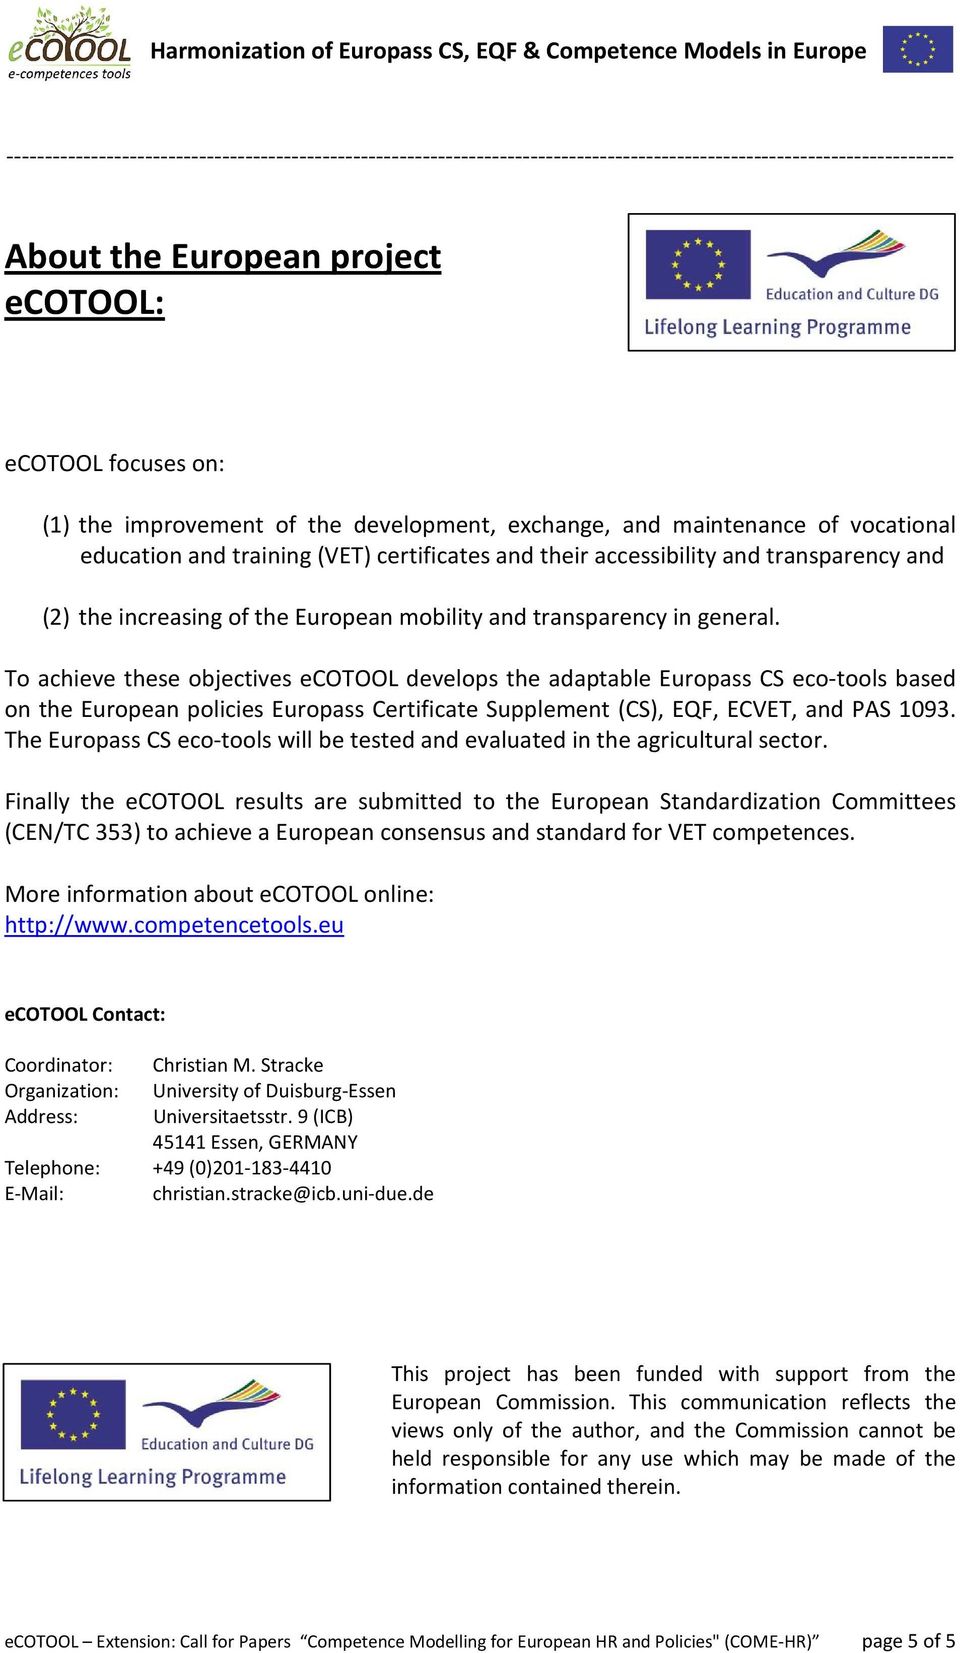 transparency in general. To achieve these objectives ecotool develops the adaptable Europass CS eco-tools based on the European policies Europass Certificate Supplement (CS), EQF, ECVET, and PAS 1093.